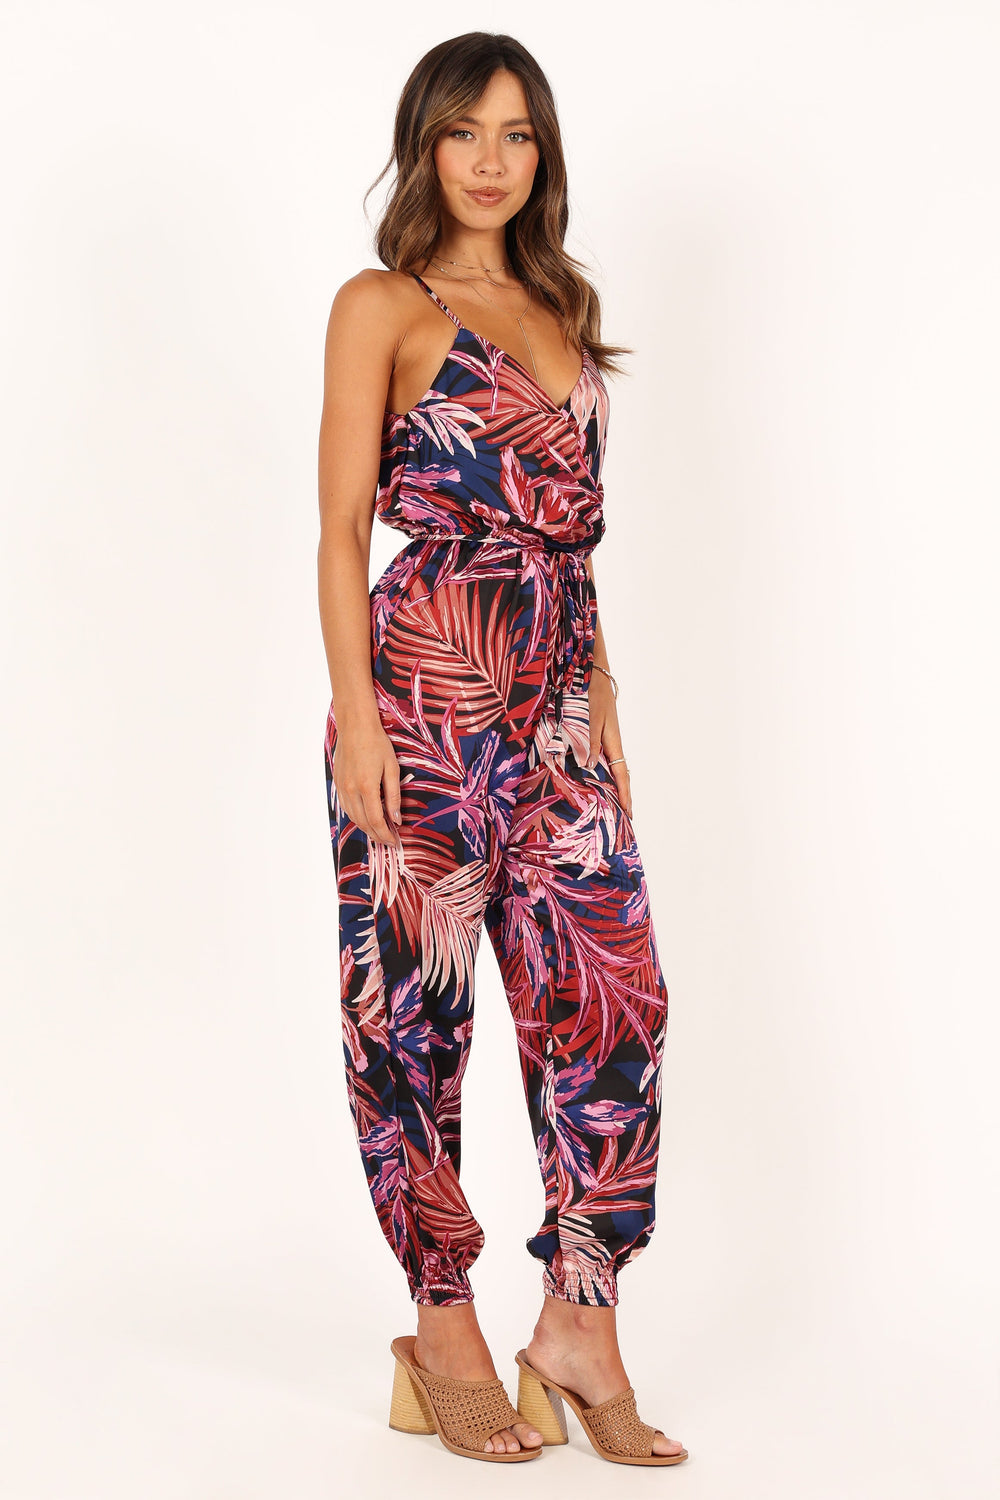 Petal and Pup USA Rompers Praiano Jumpsuit - Palm Print